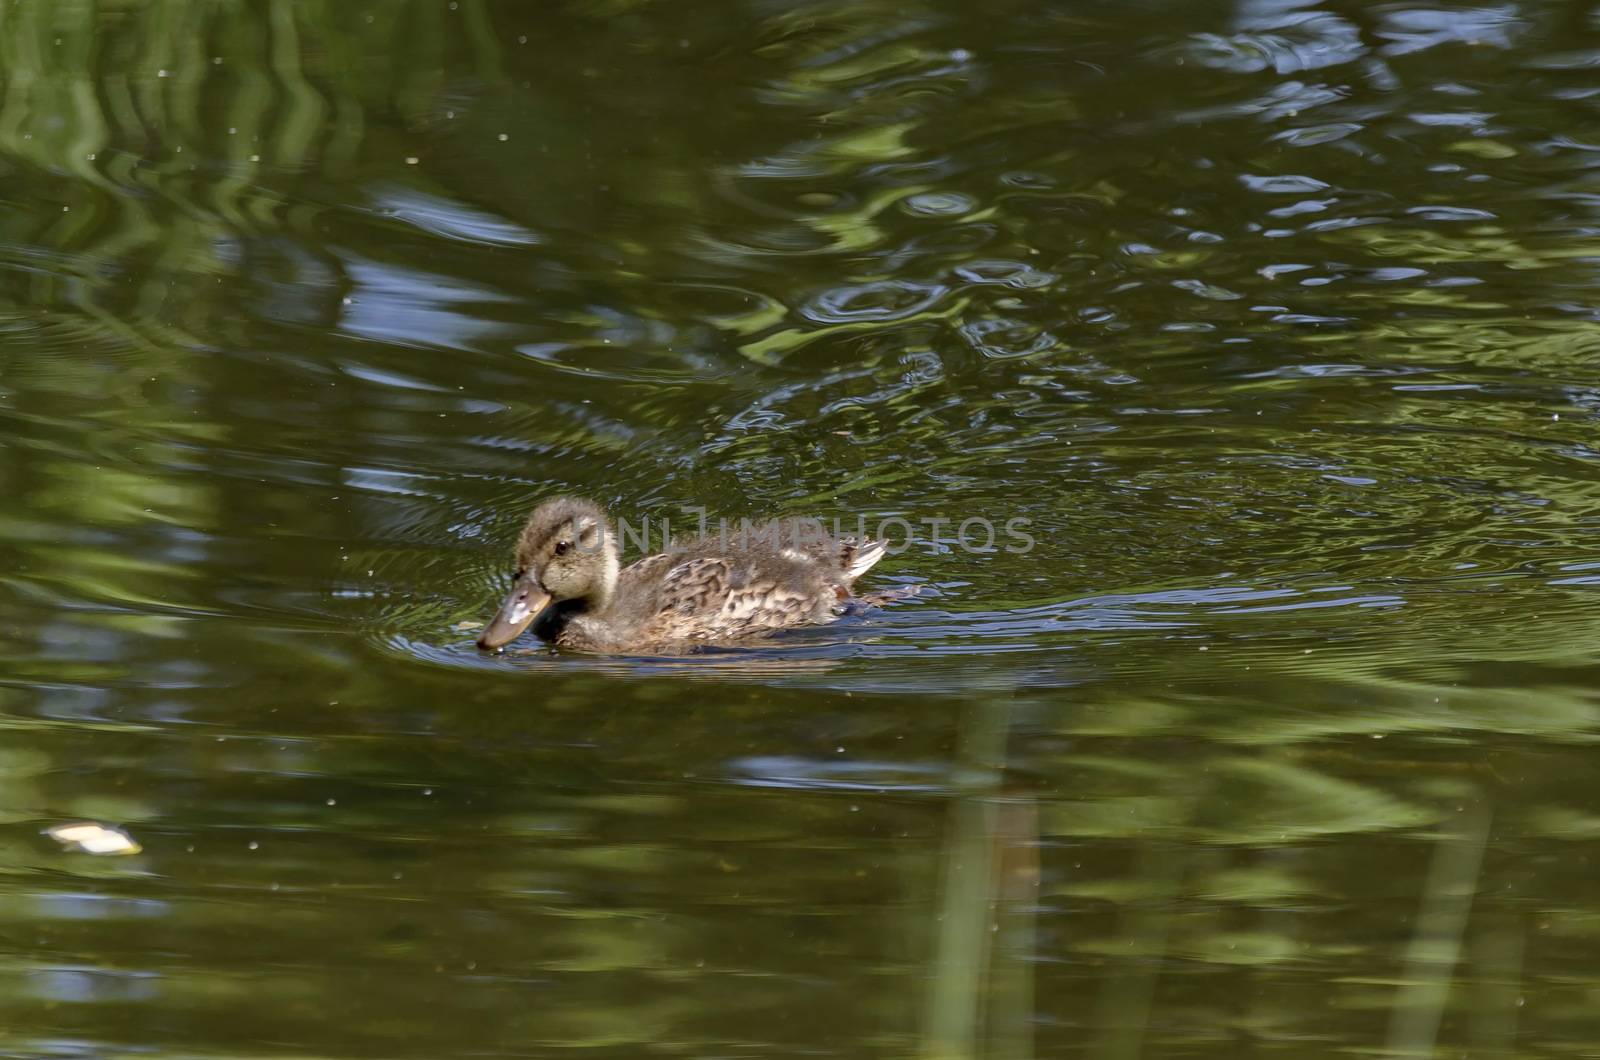 Hen duckling mallard  with brown feathers  swimming on pond, Sofia, Bulgaria